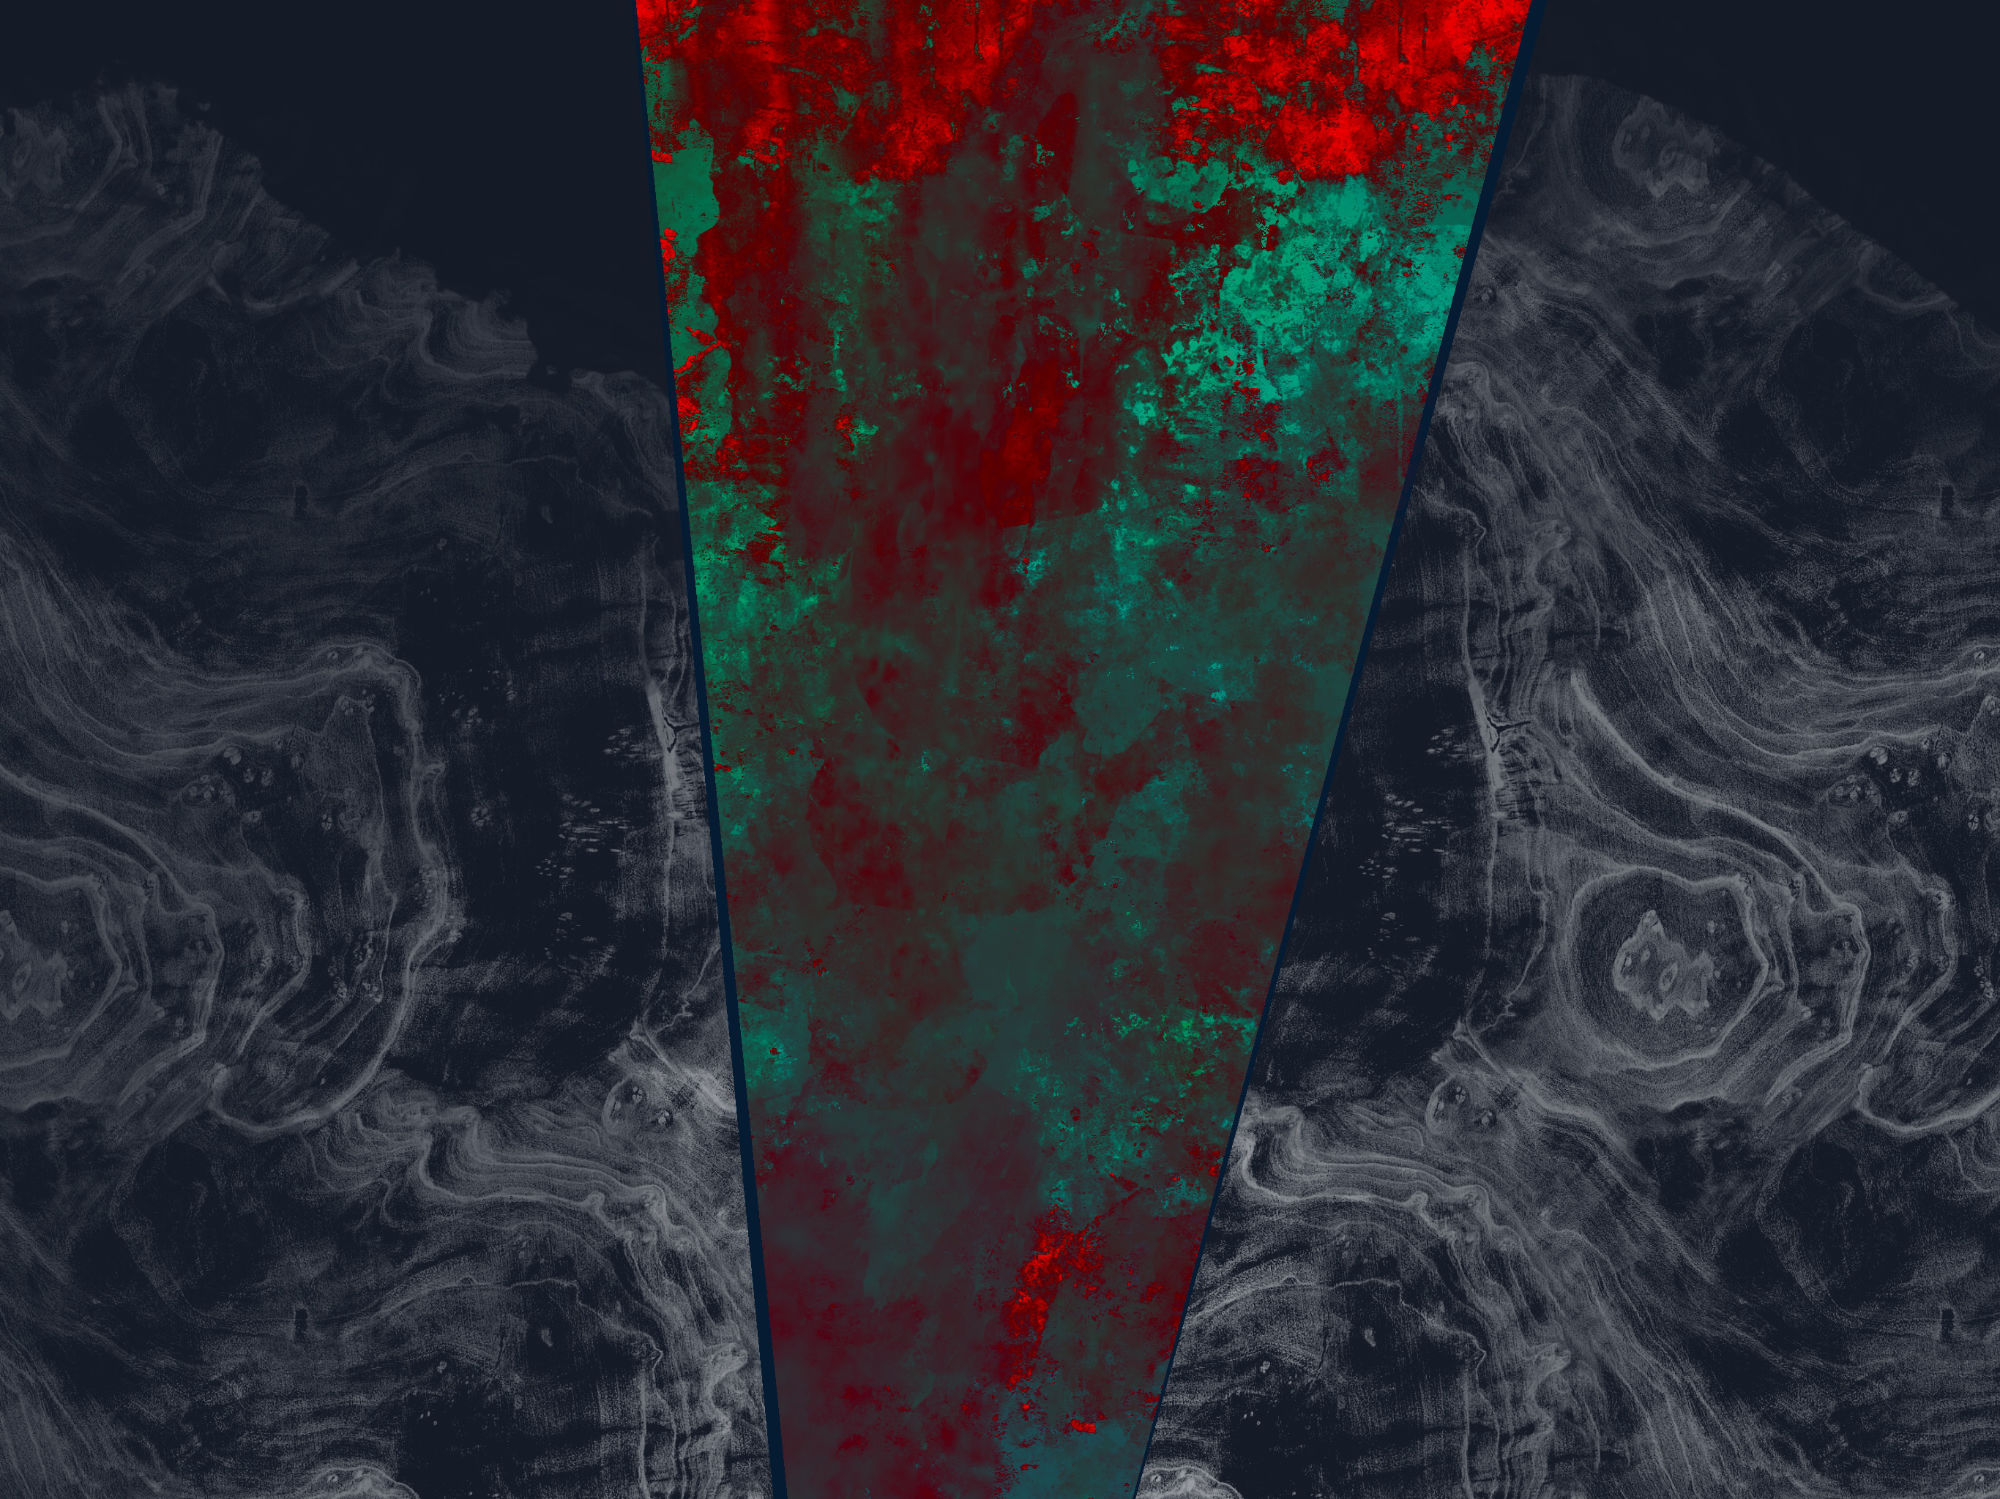 Abstract painting, background: dark blue with grey wood grain texture, foreground: green/red corrosion pattern in a vertical slice in the middle of the frame.